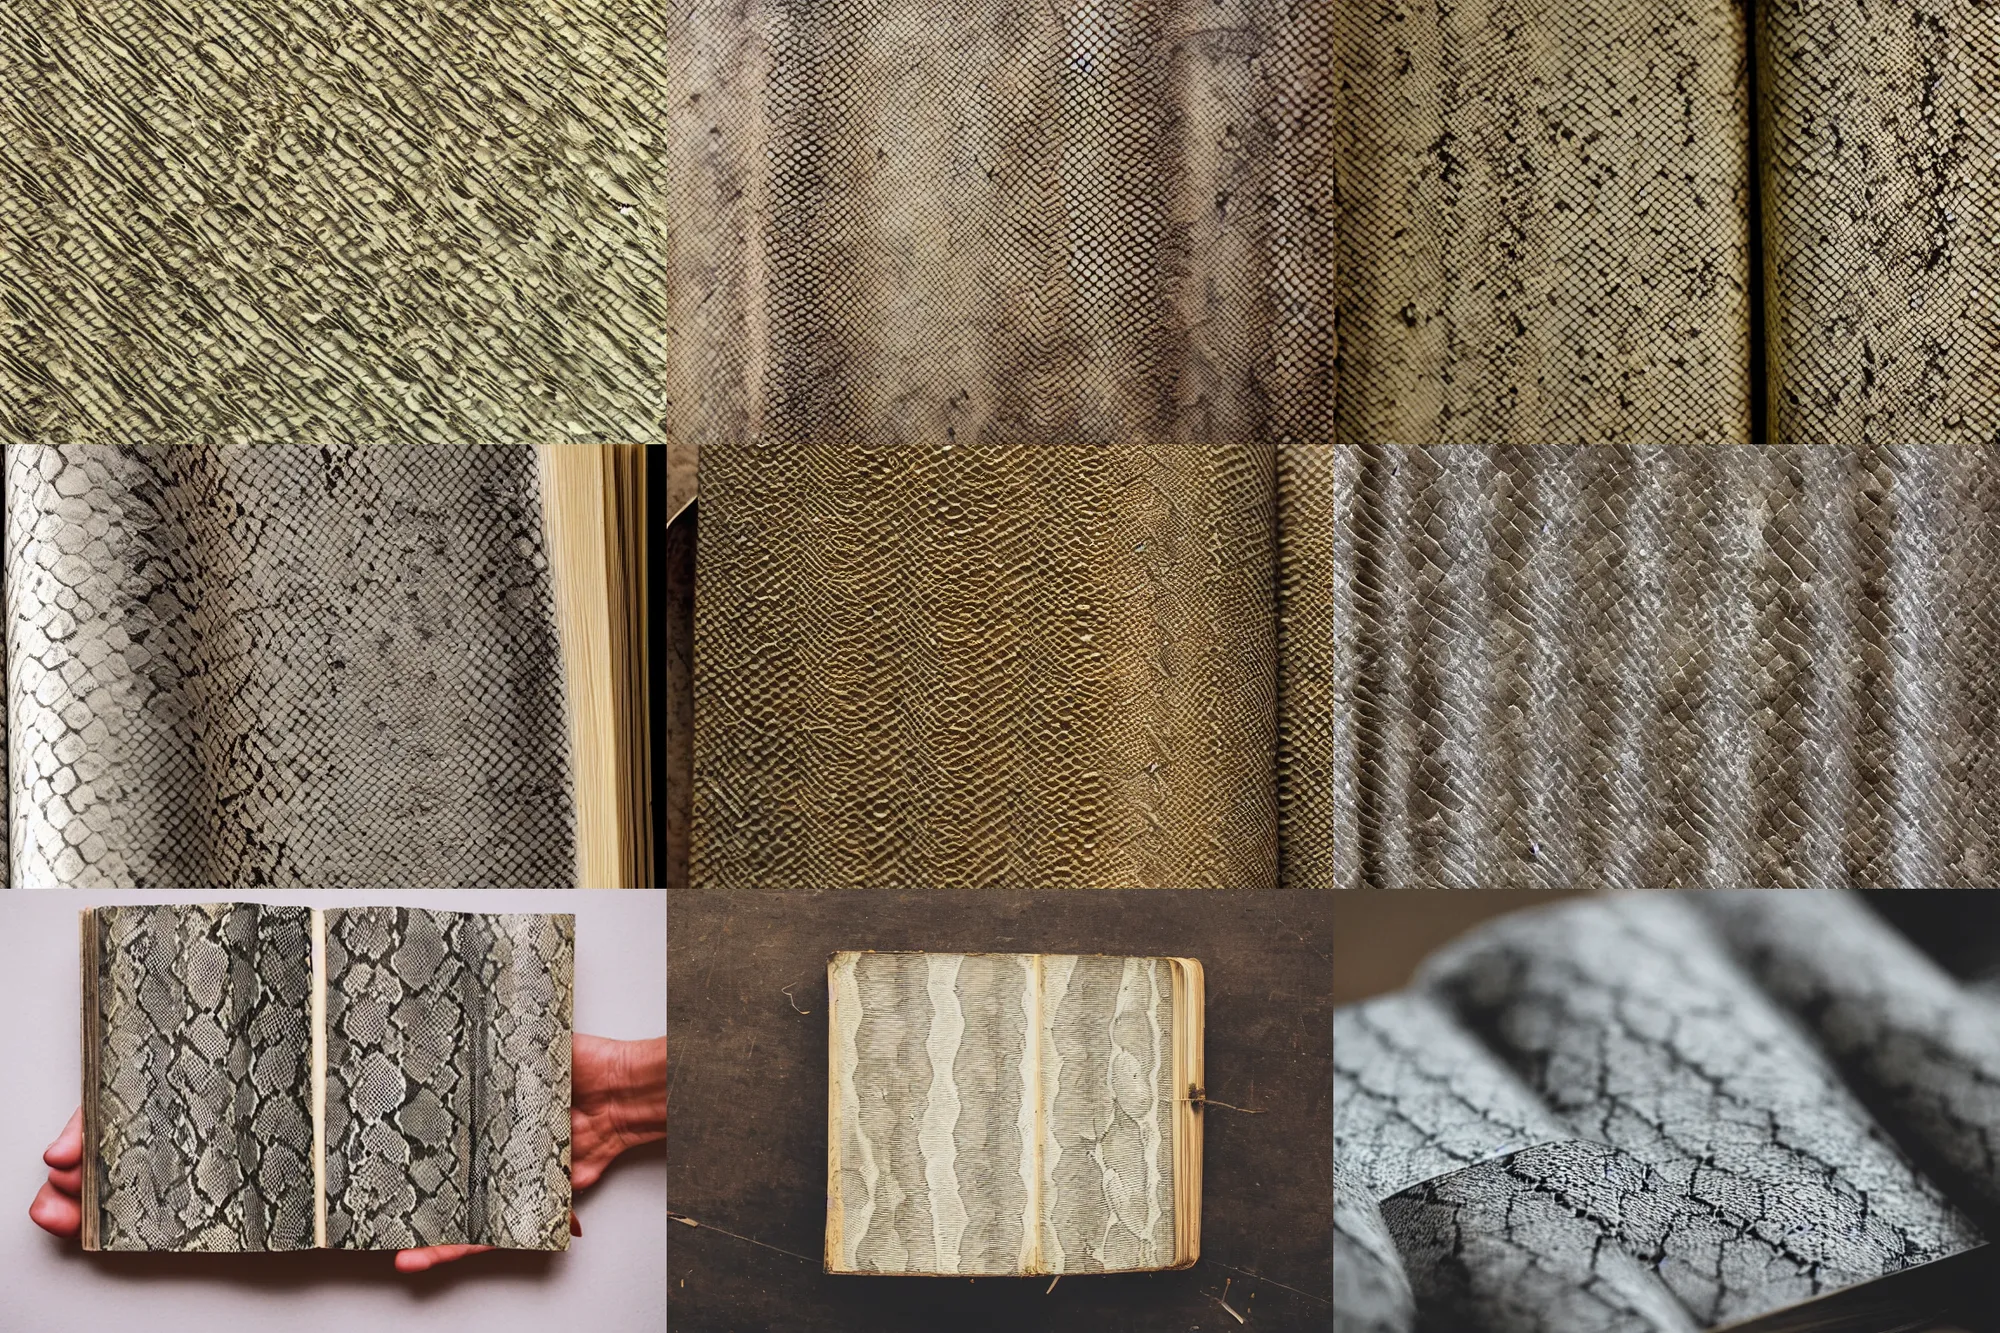 Prompt: photograph of snake skin covering a book